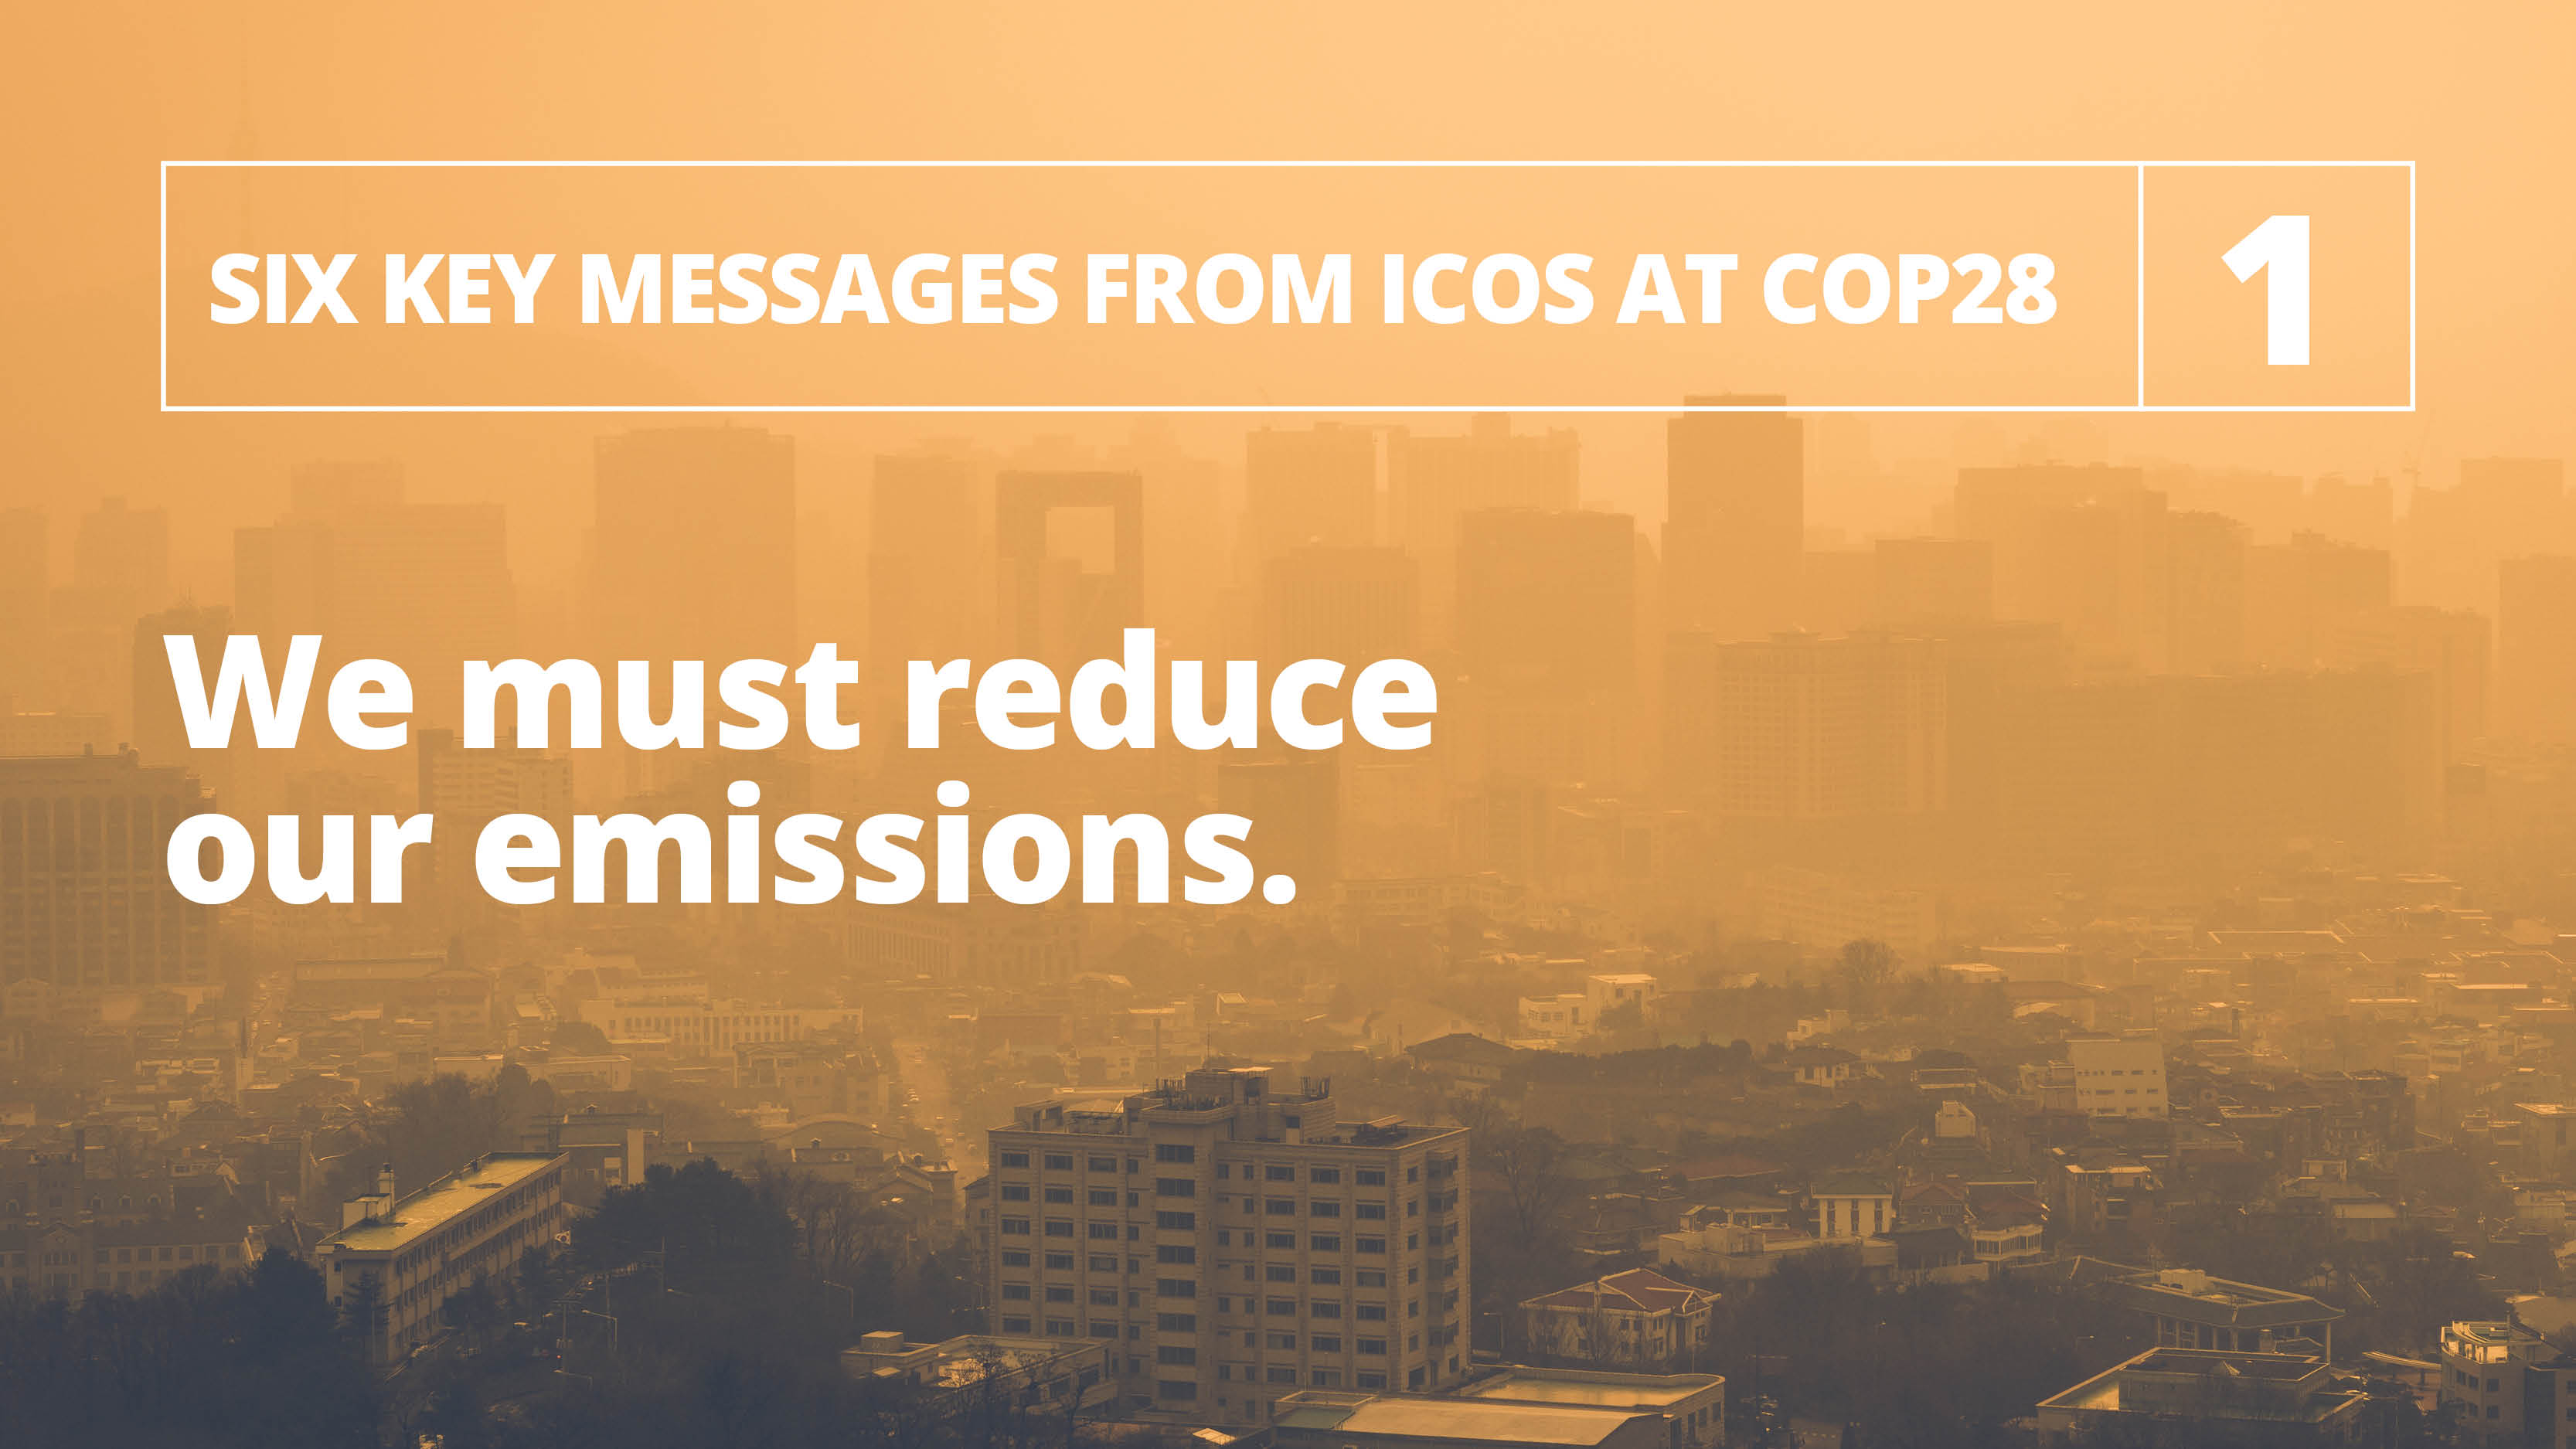 ICOS at COP28 / Key messages